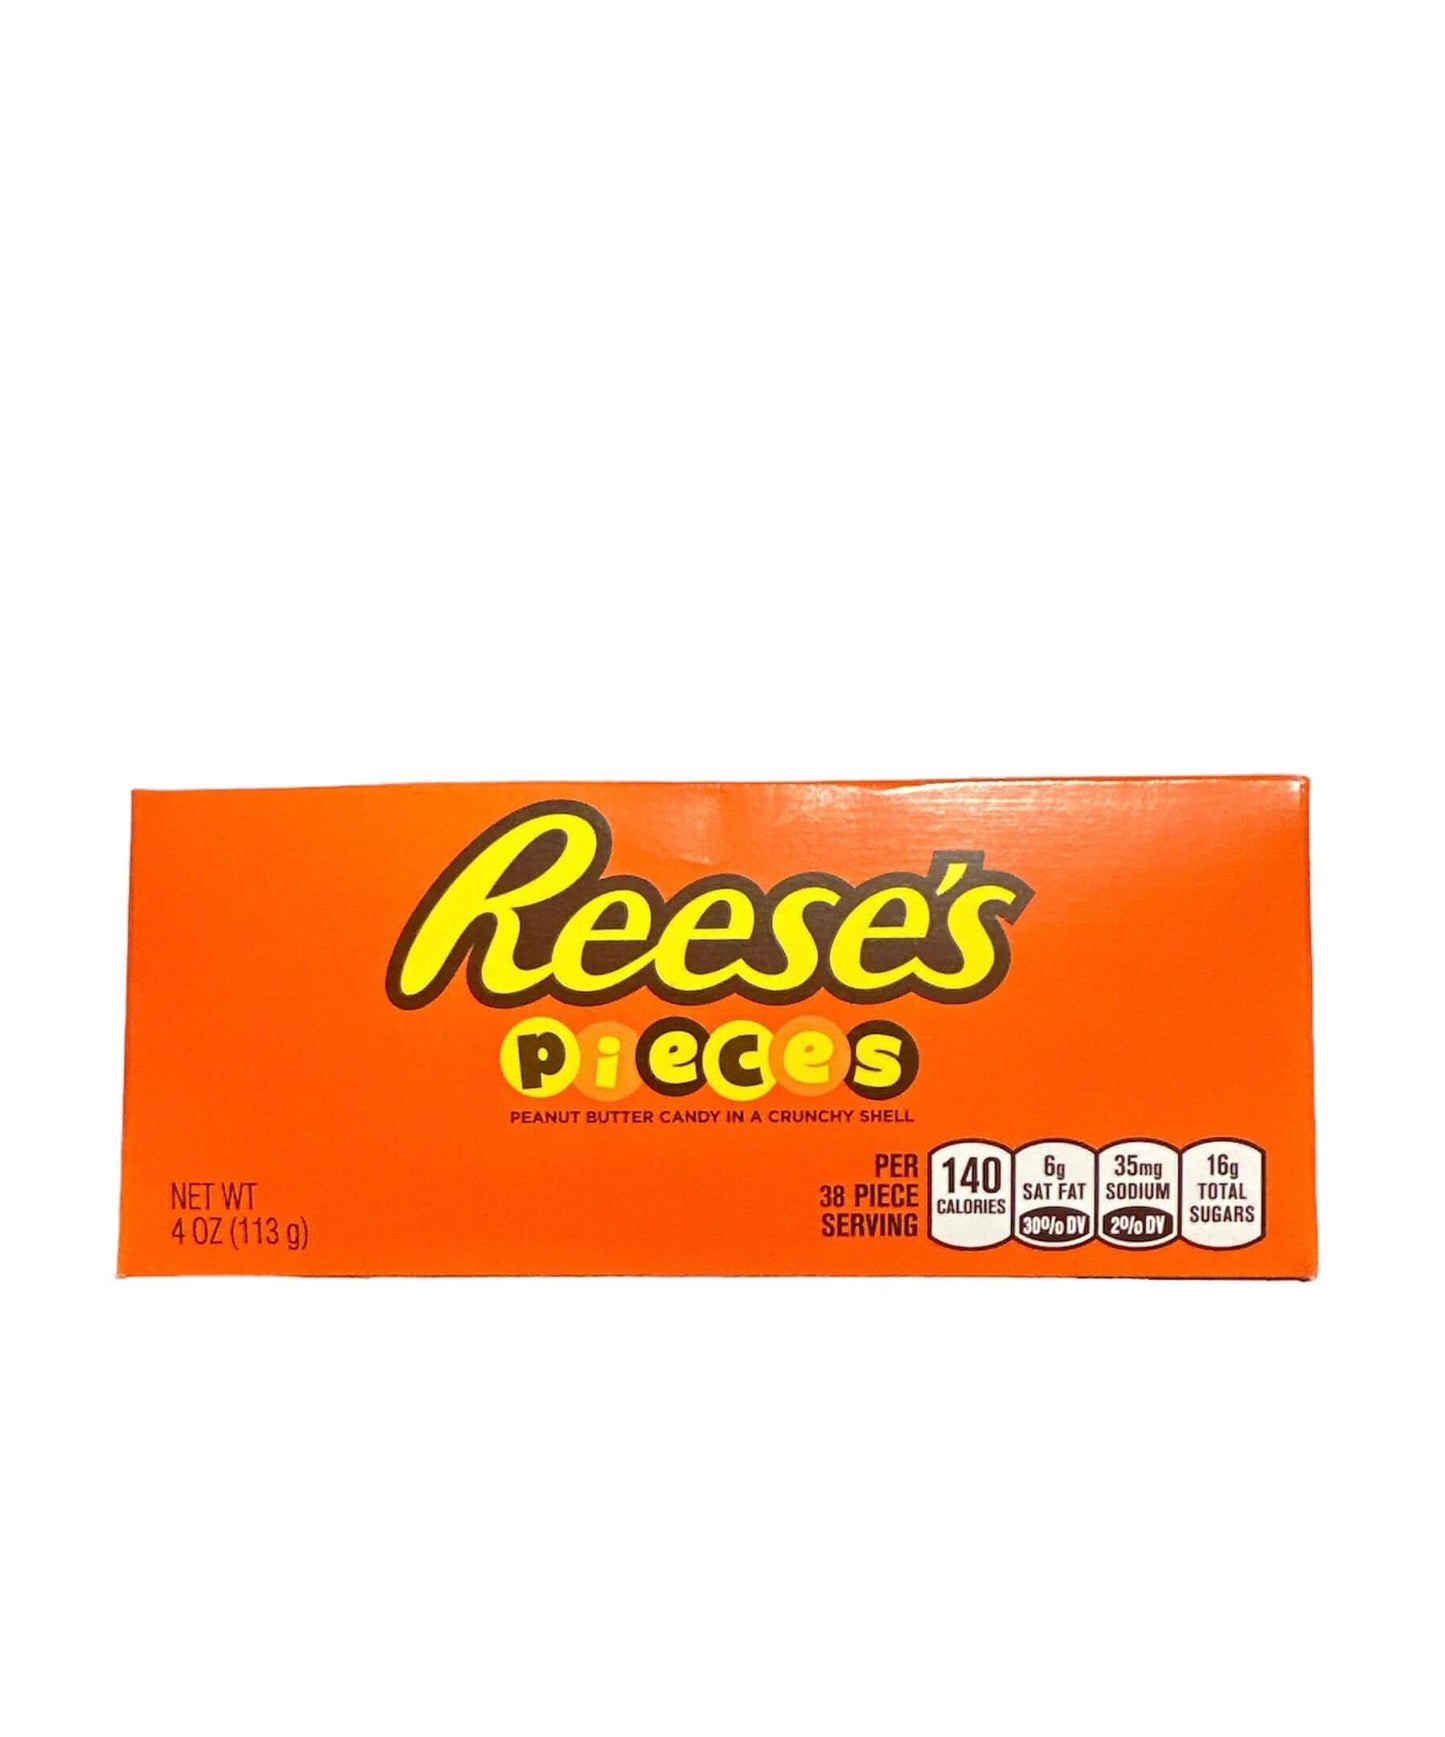 Reese’s Pieces Box